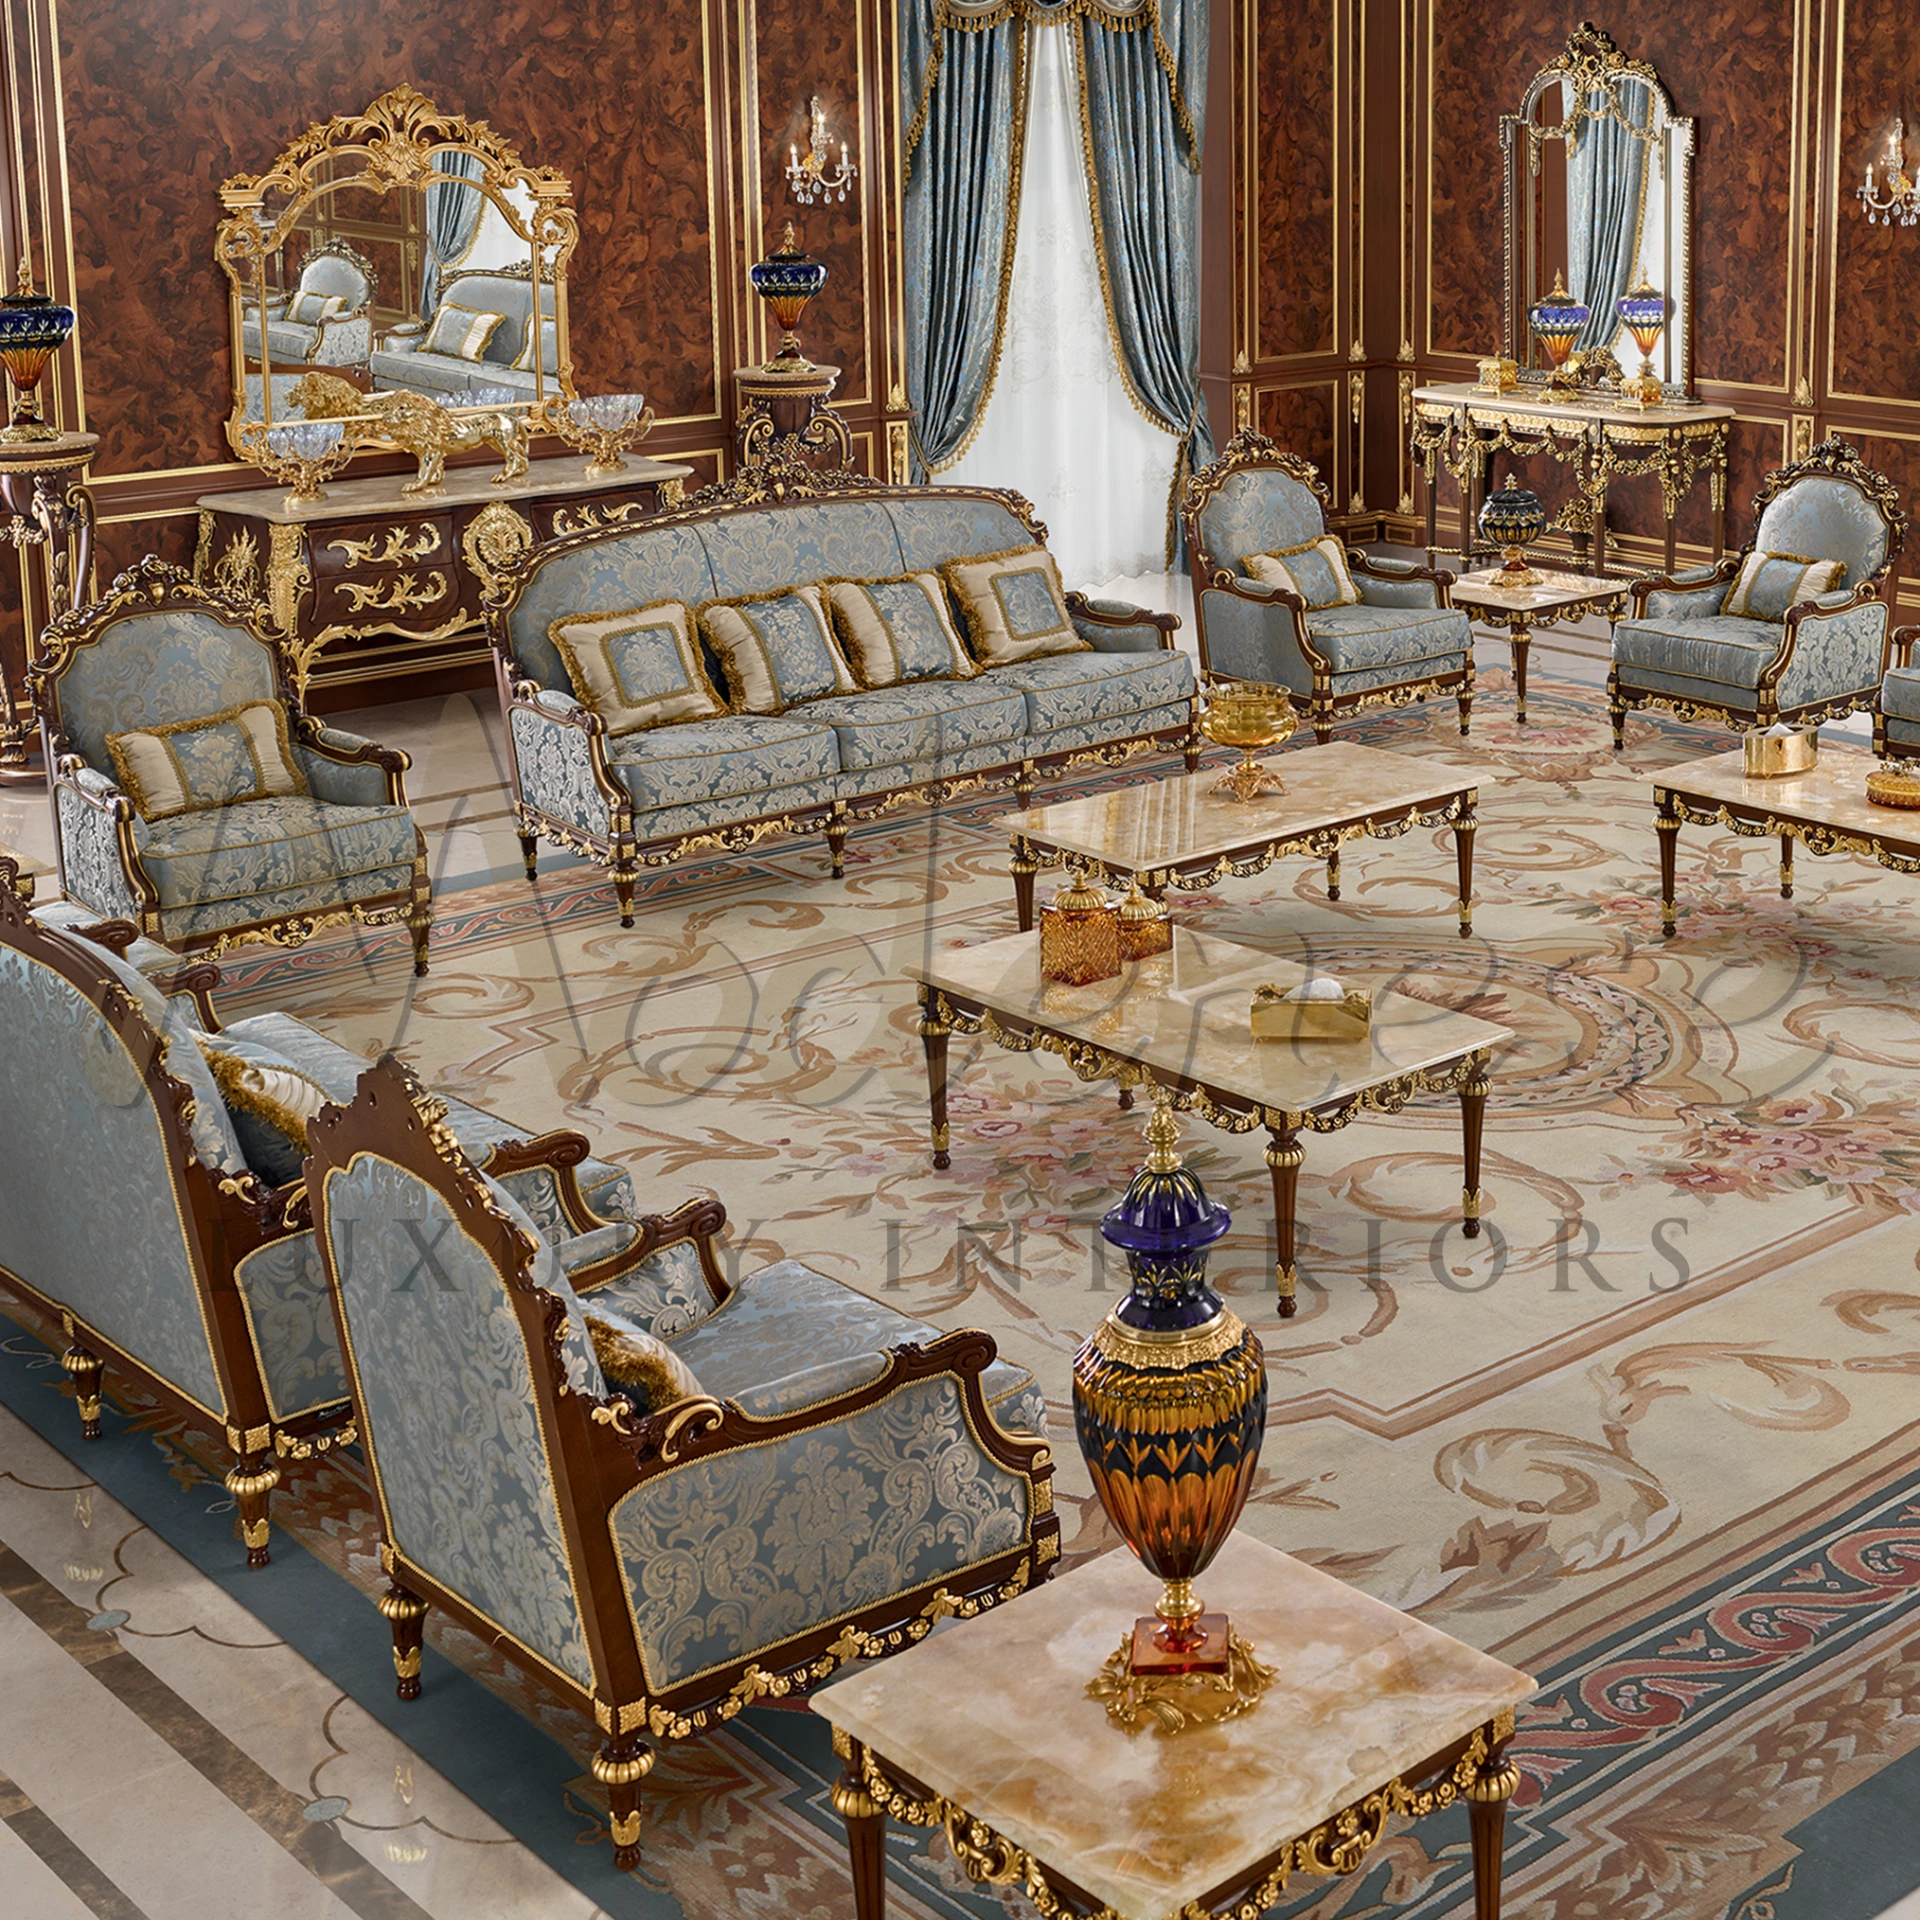 Luxurious sitting area with golden details furniture, with luxury blue fabrics, and an exquisitely patterned floor.